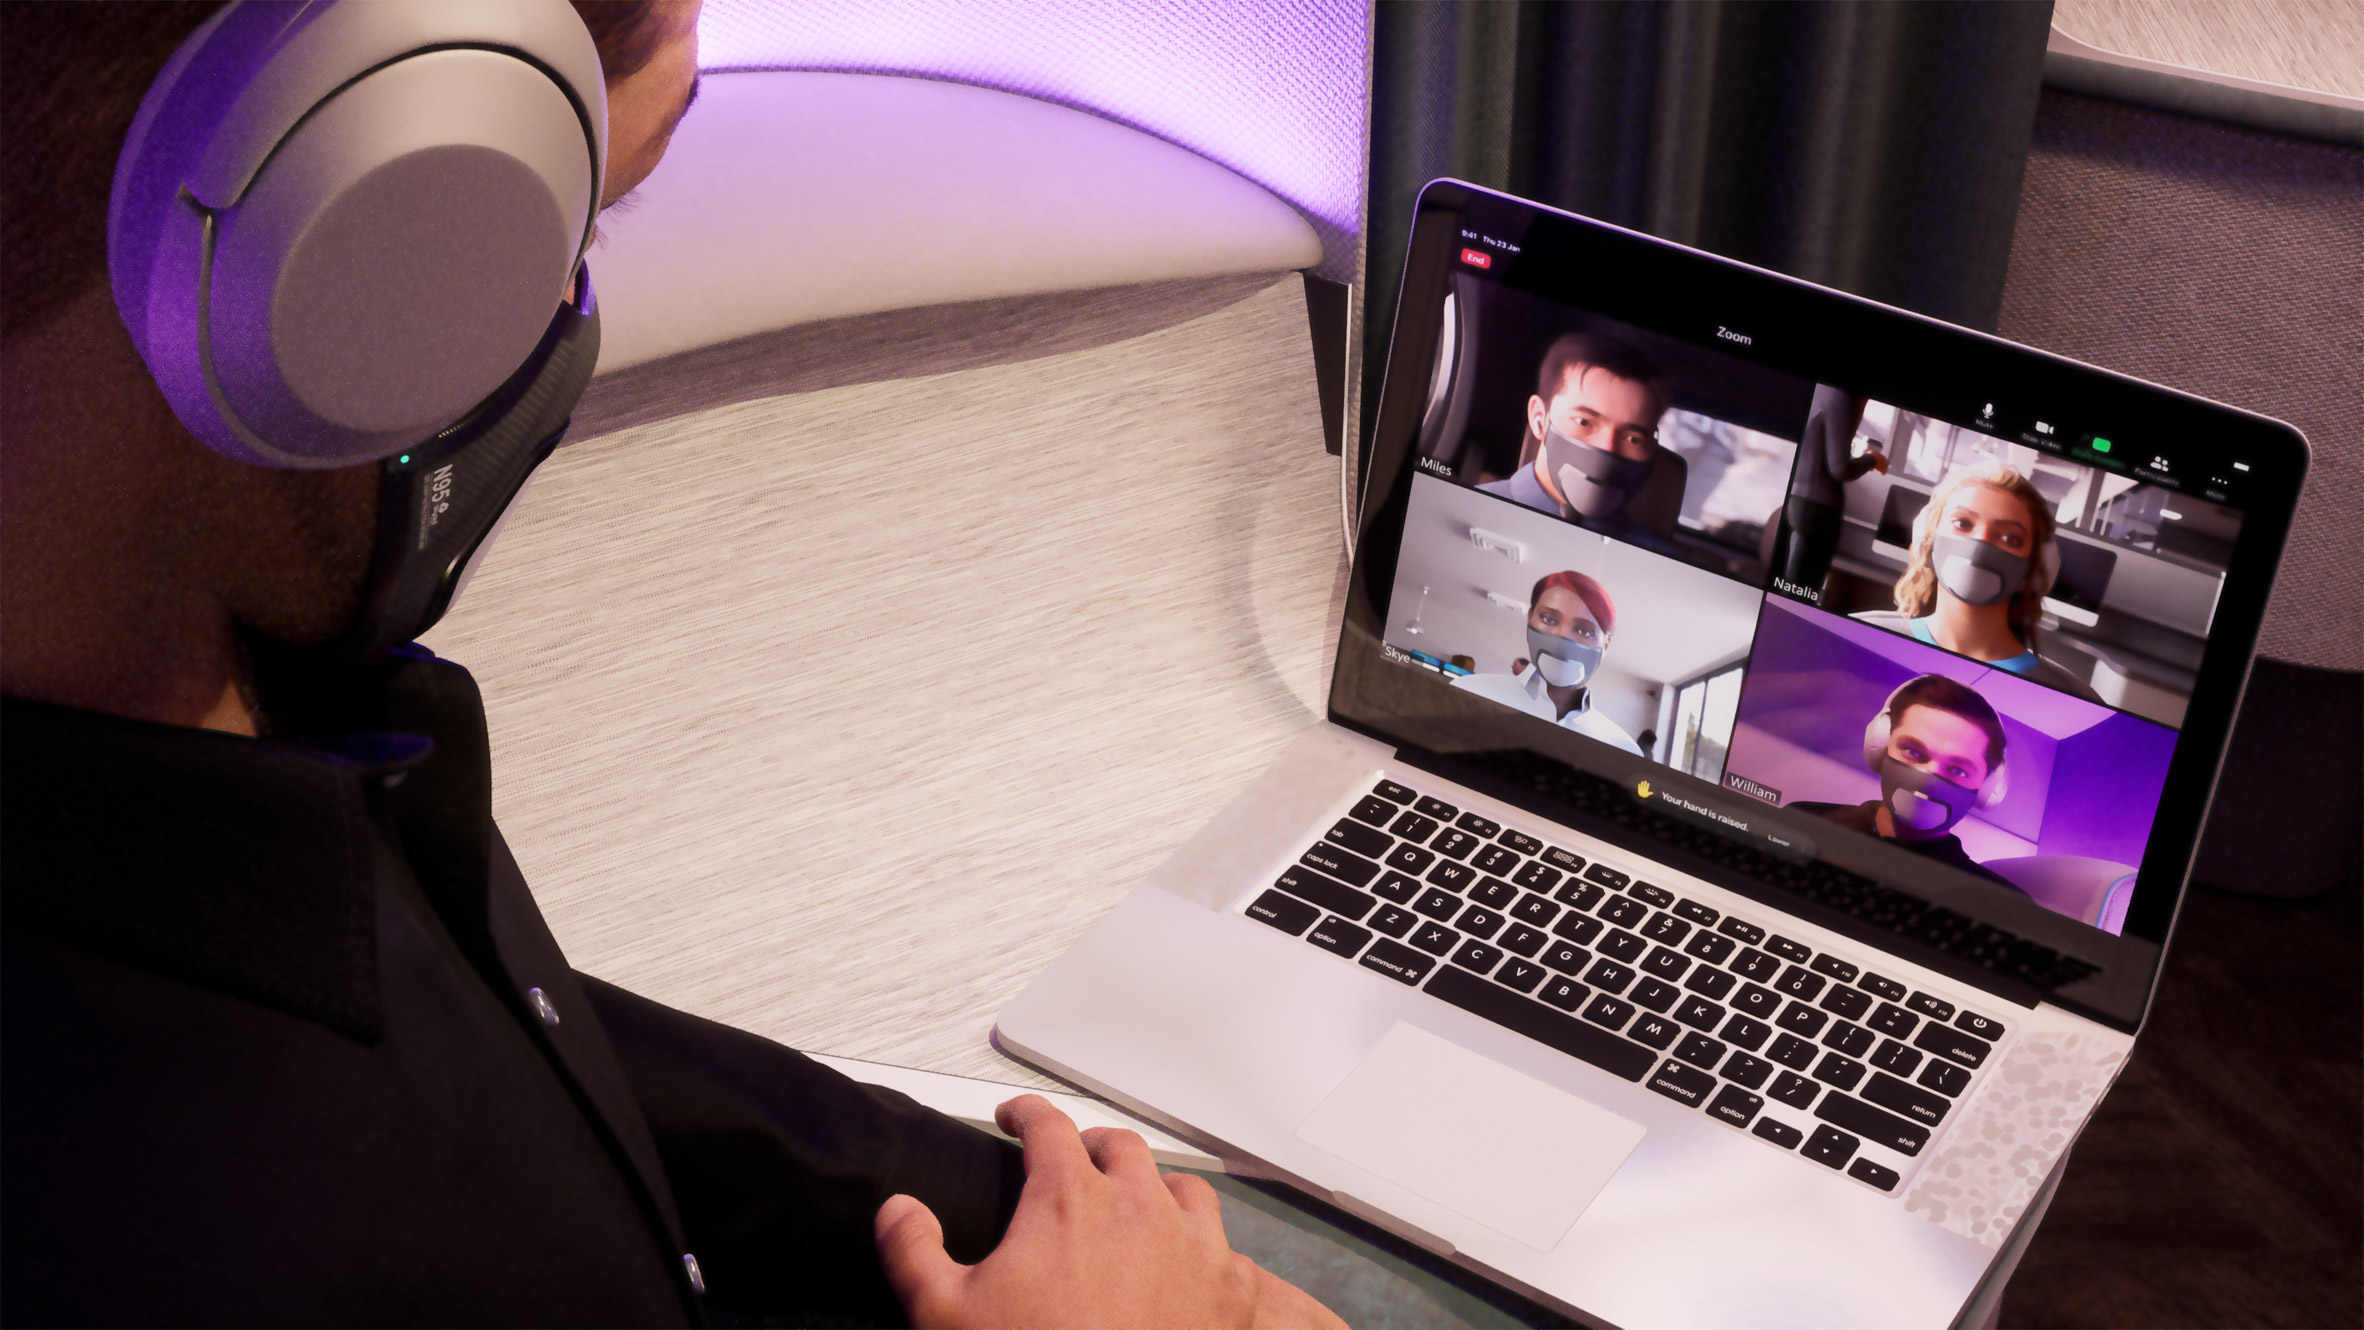 PriestmanGood and Skyted face mask for video calls